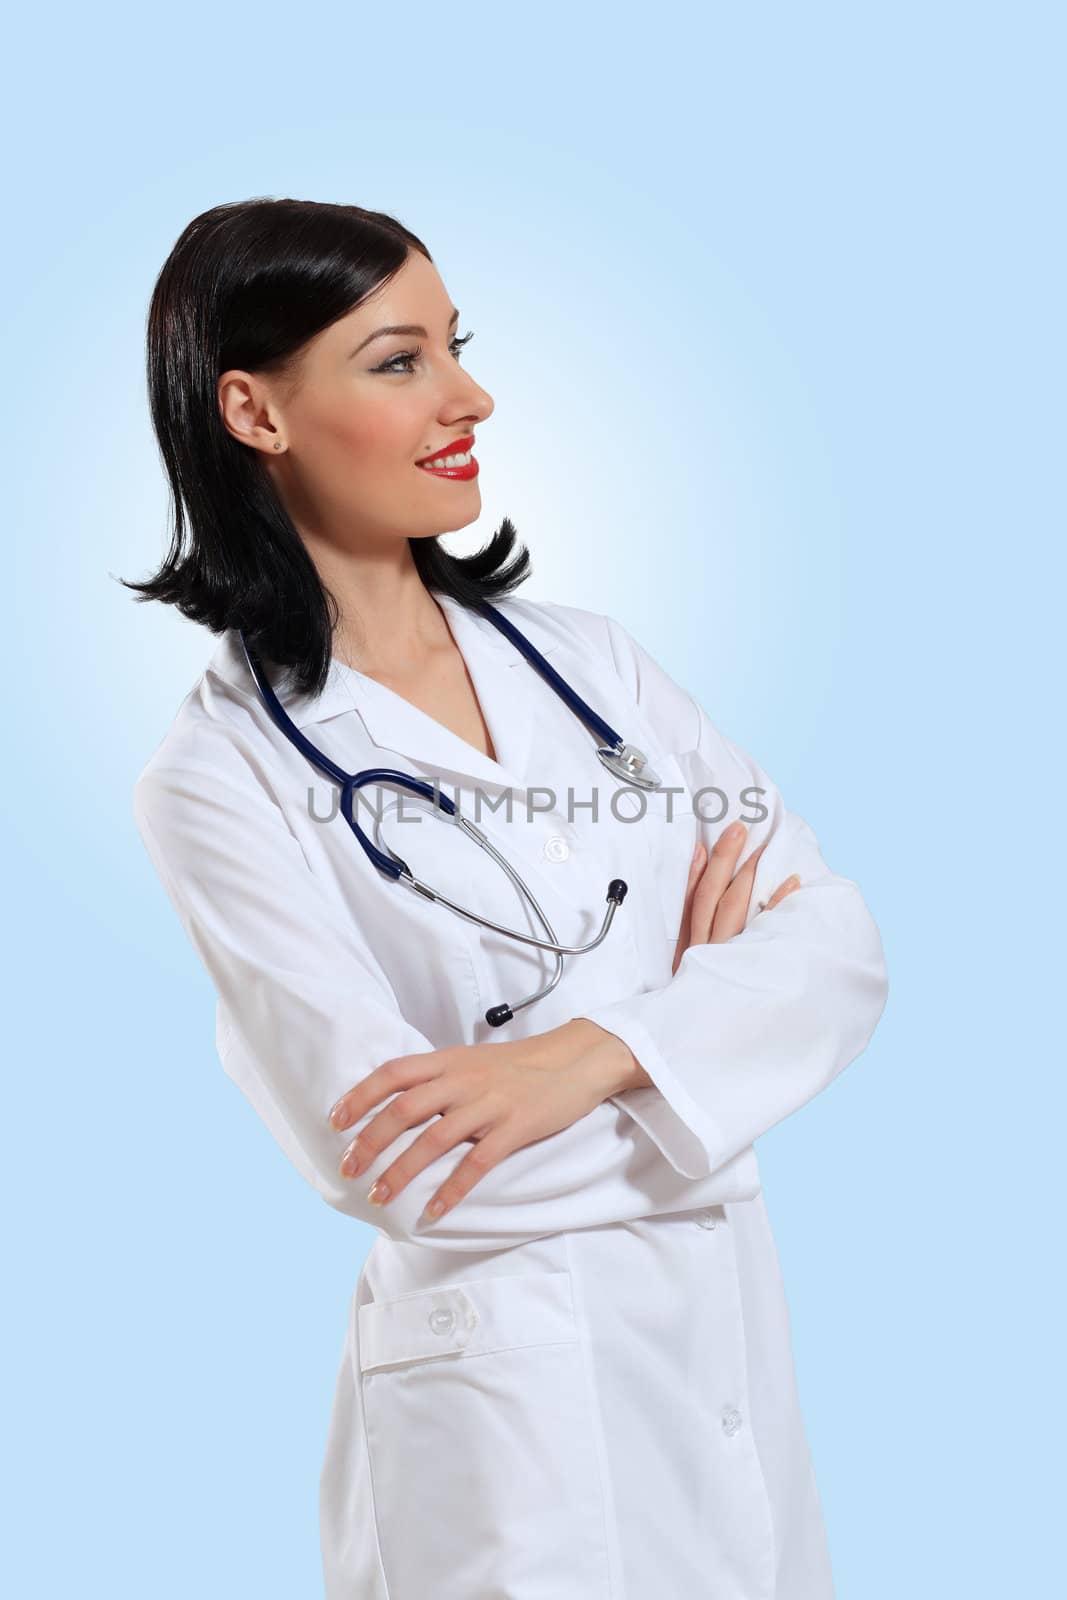 young female doctor portrait by sergey_nivens